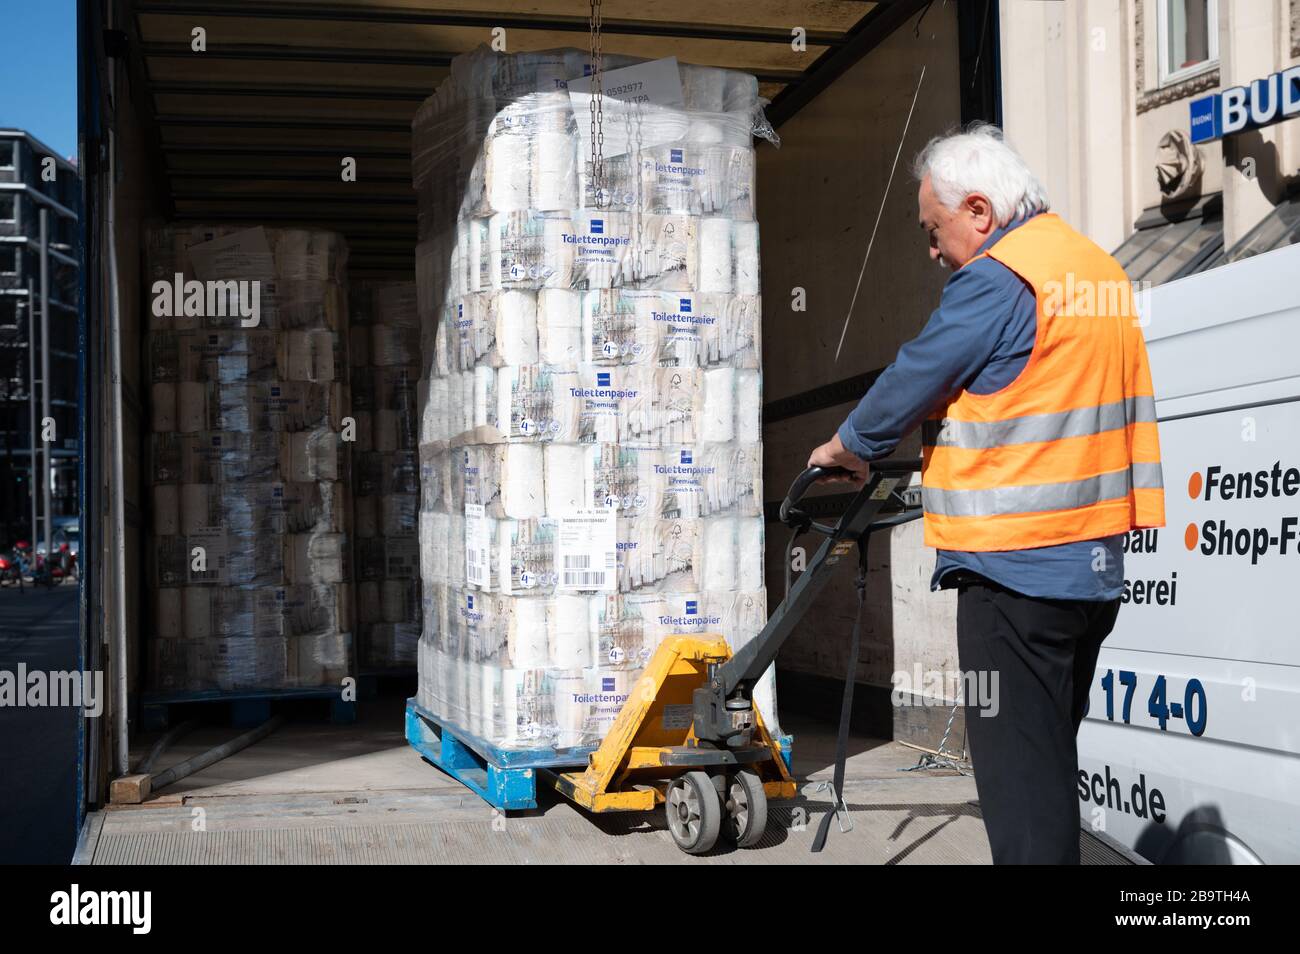 Hamburg, Germany. 25th Mar, 2020. A man delivers a pallet of toilet paper to a Budnikowsky branch. In the Corona crisis, toilet paper is still being bought by hamsters. Credit: Christophe Gateau/dpa/Alamy Live News Stock Photo